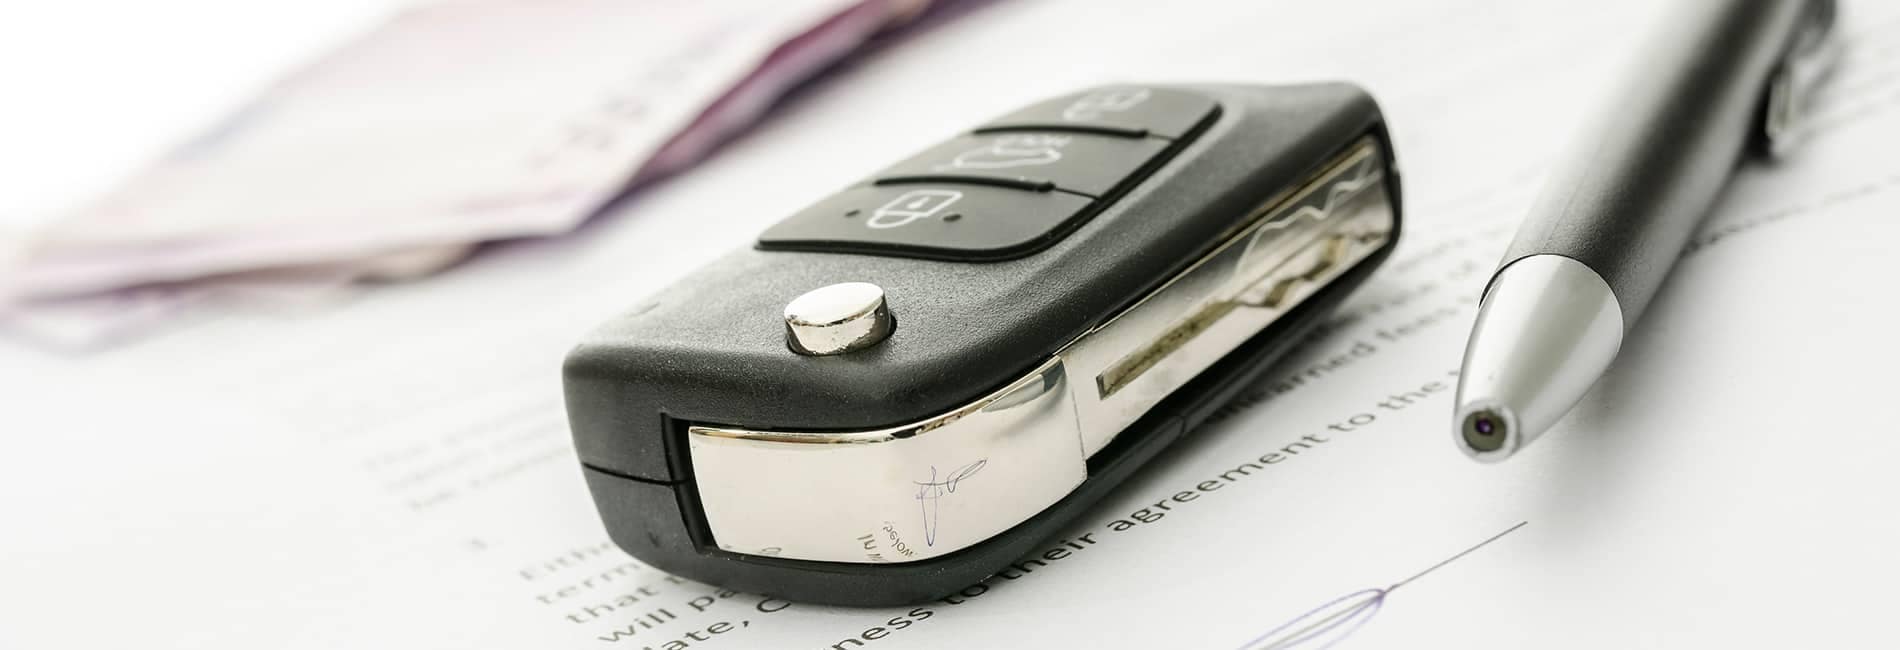 Car keys on a paper waiting to be signed for a new car